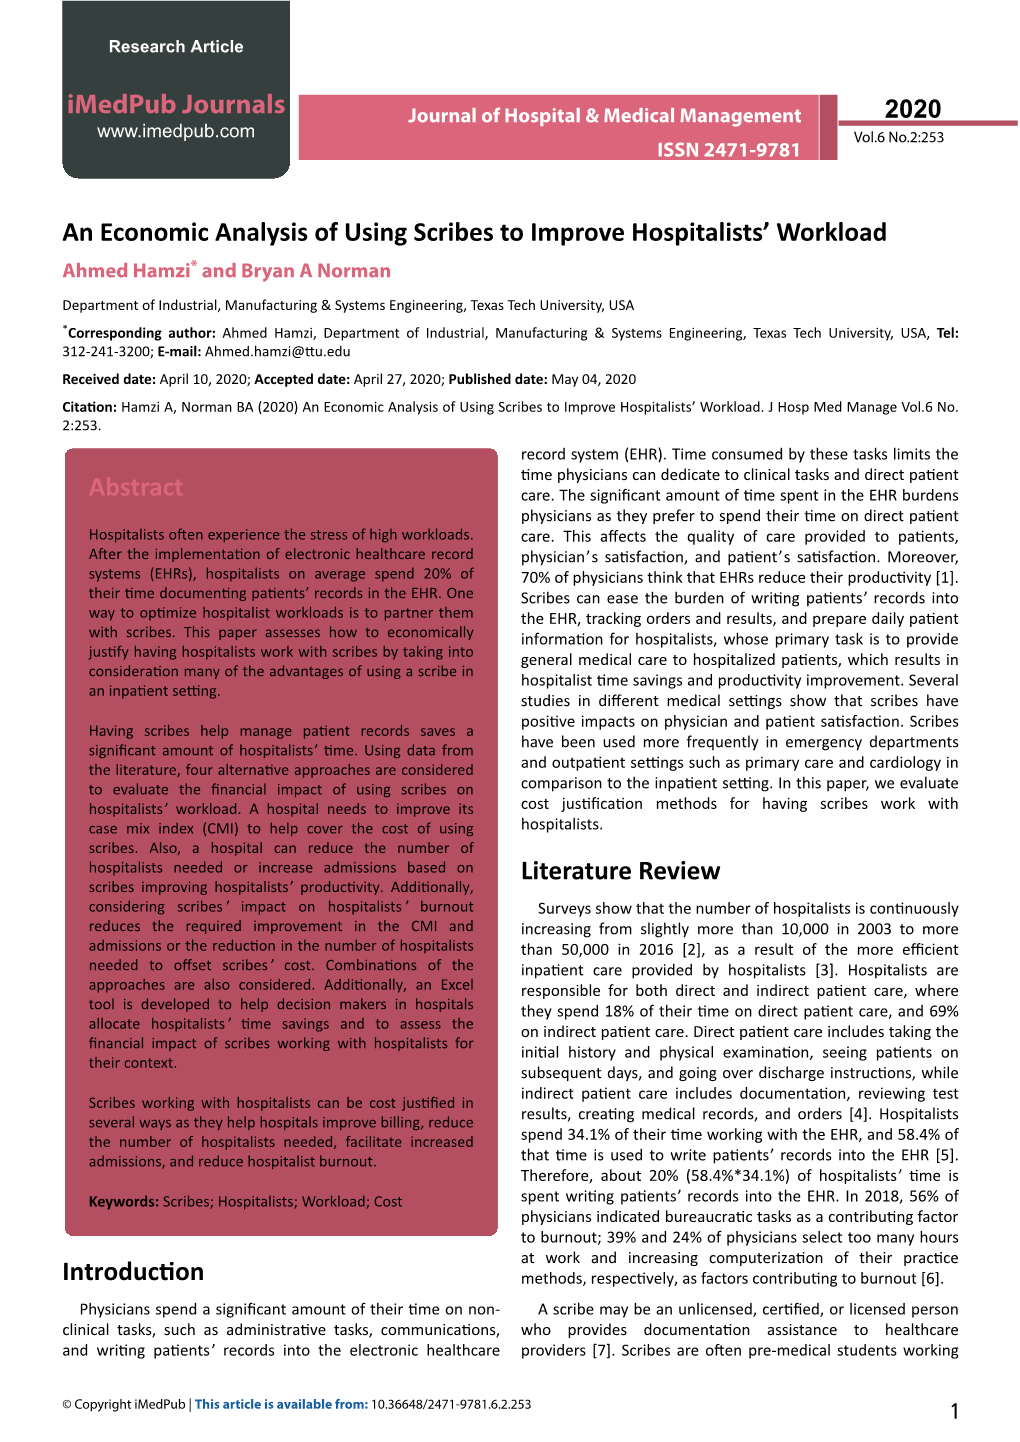 An Economic Analysis of Using Scribes to Improve Hospitalists' Workload